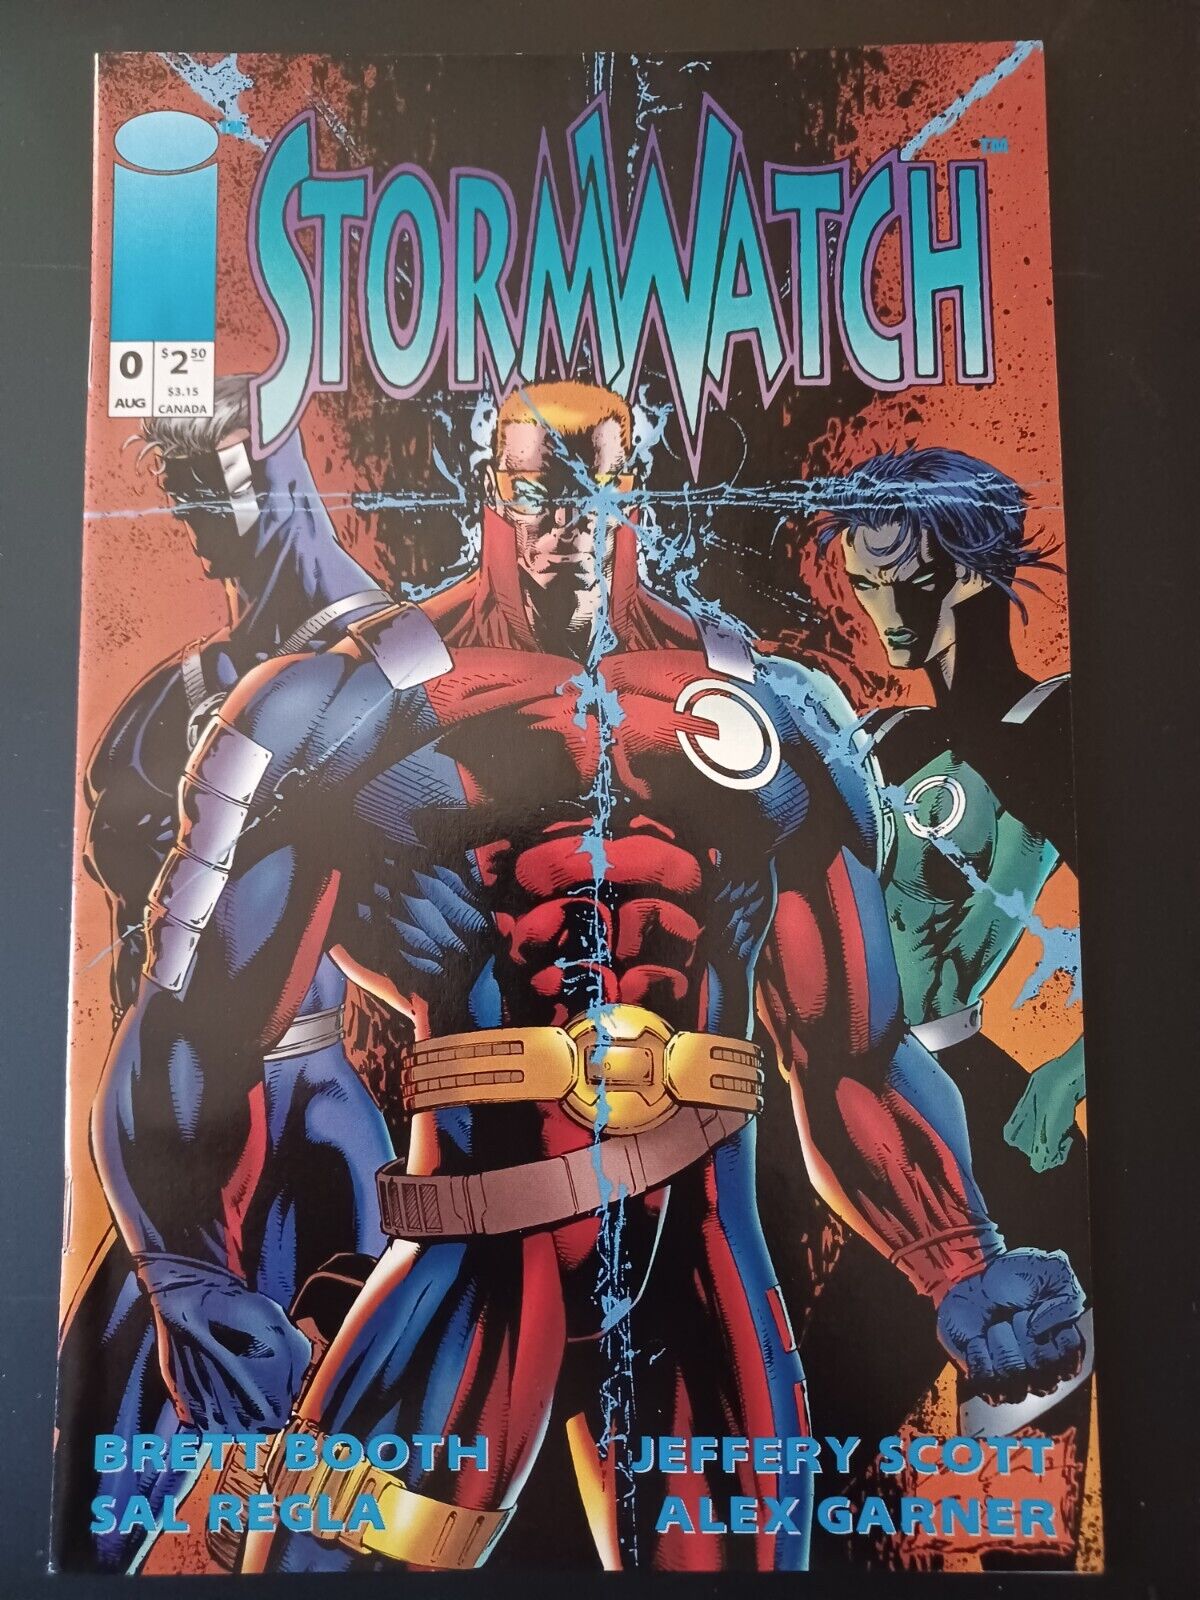 Stormwatch #0 Comic Book - Early Image Comic - Combined Shipping + Lots of Pics